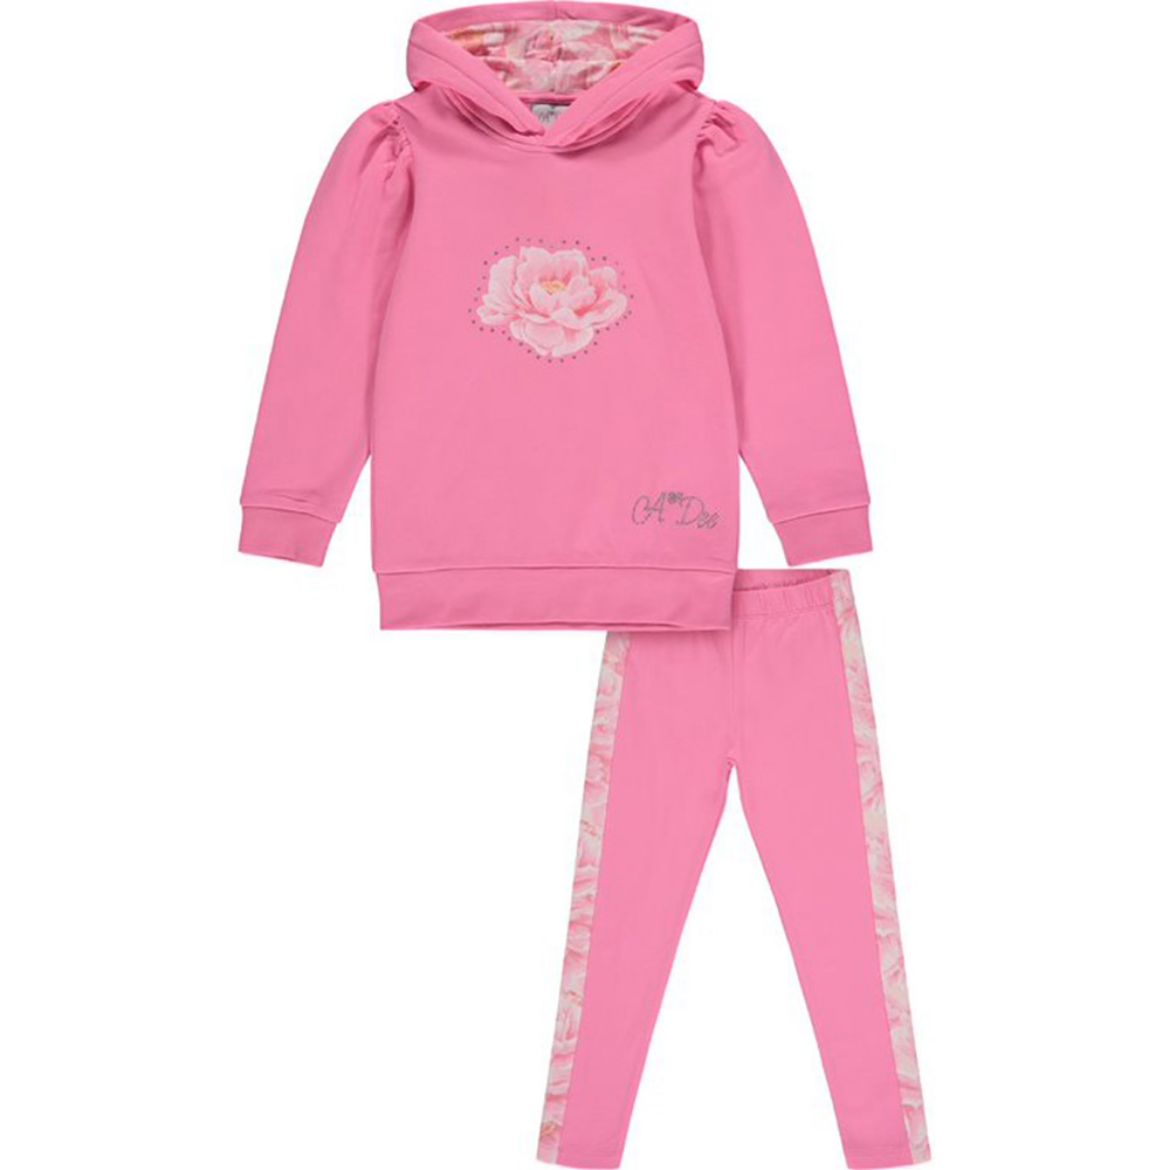 Picture of A Dee Girls Ariana Pink Hoody Legging Set